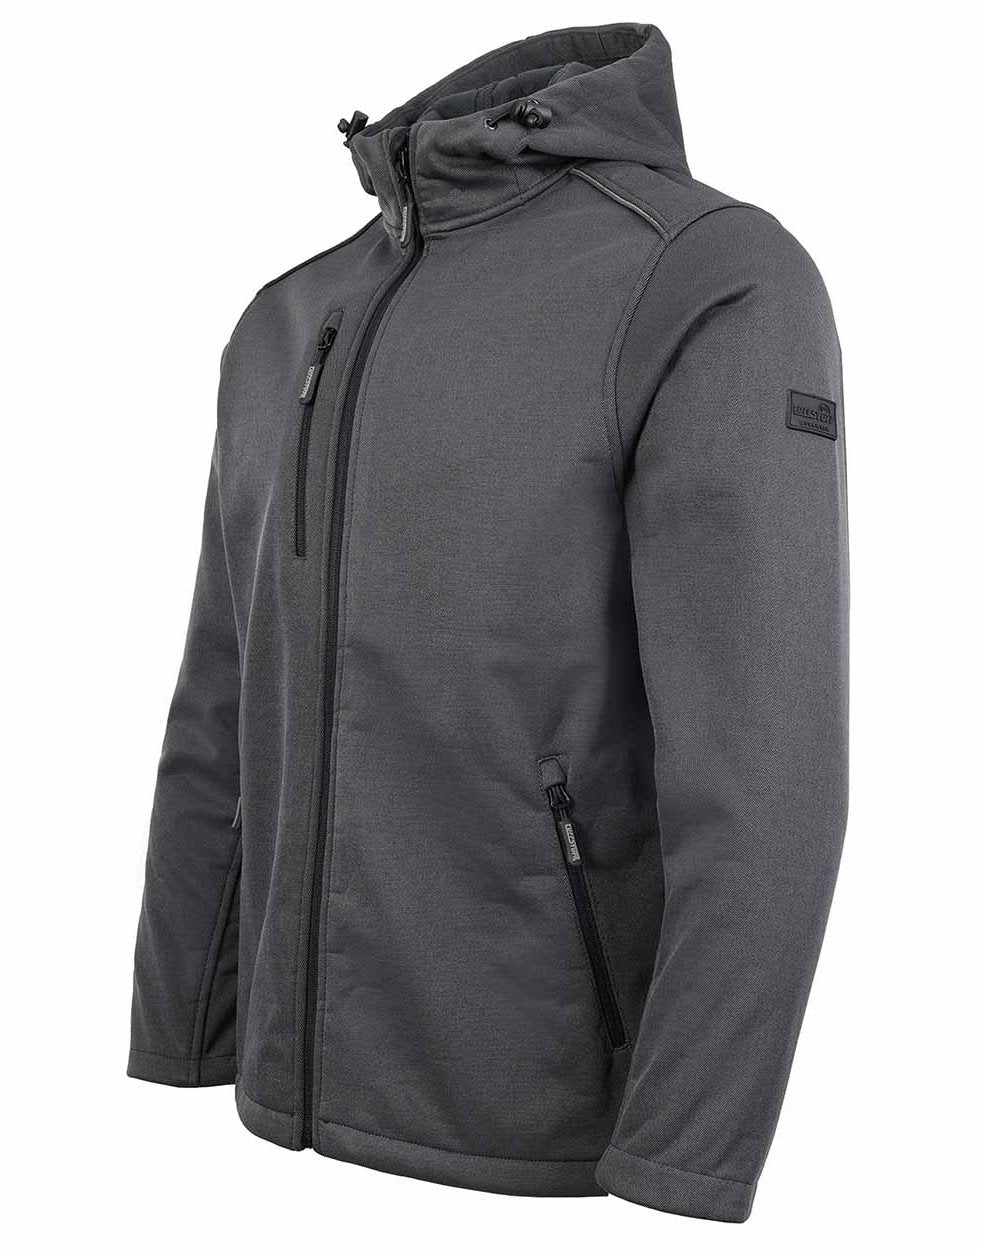 Grey Coloured TuffStuff Hale Jacket On A White Background 